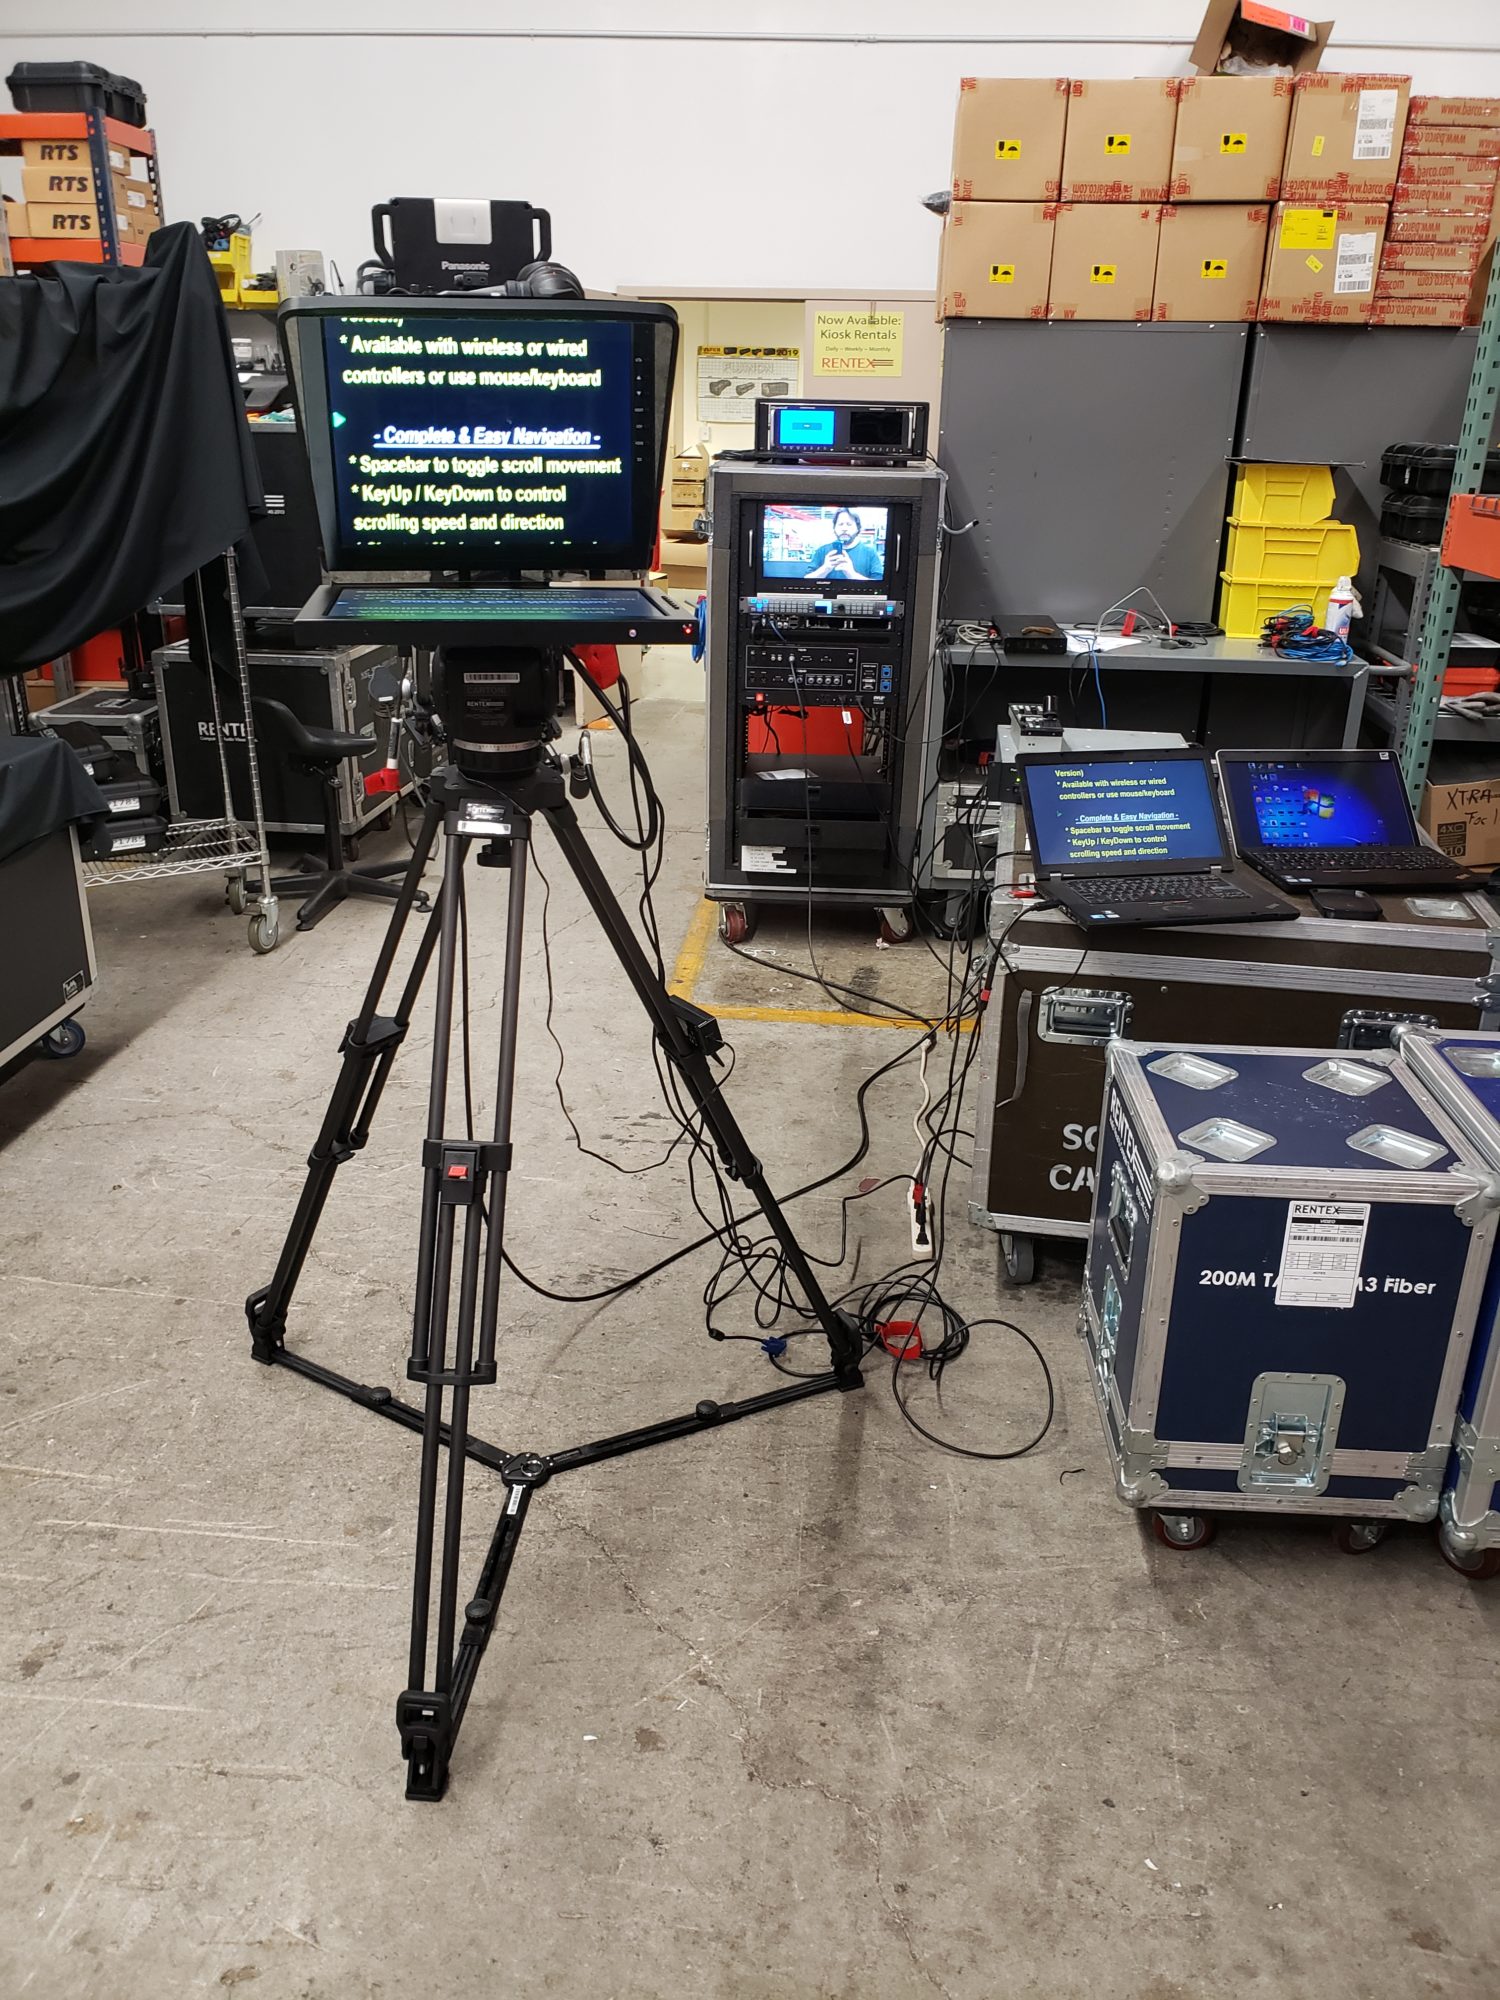 ikan PT4700-SDI Prompter System for rent